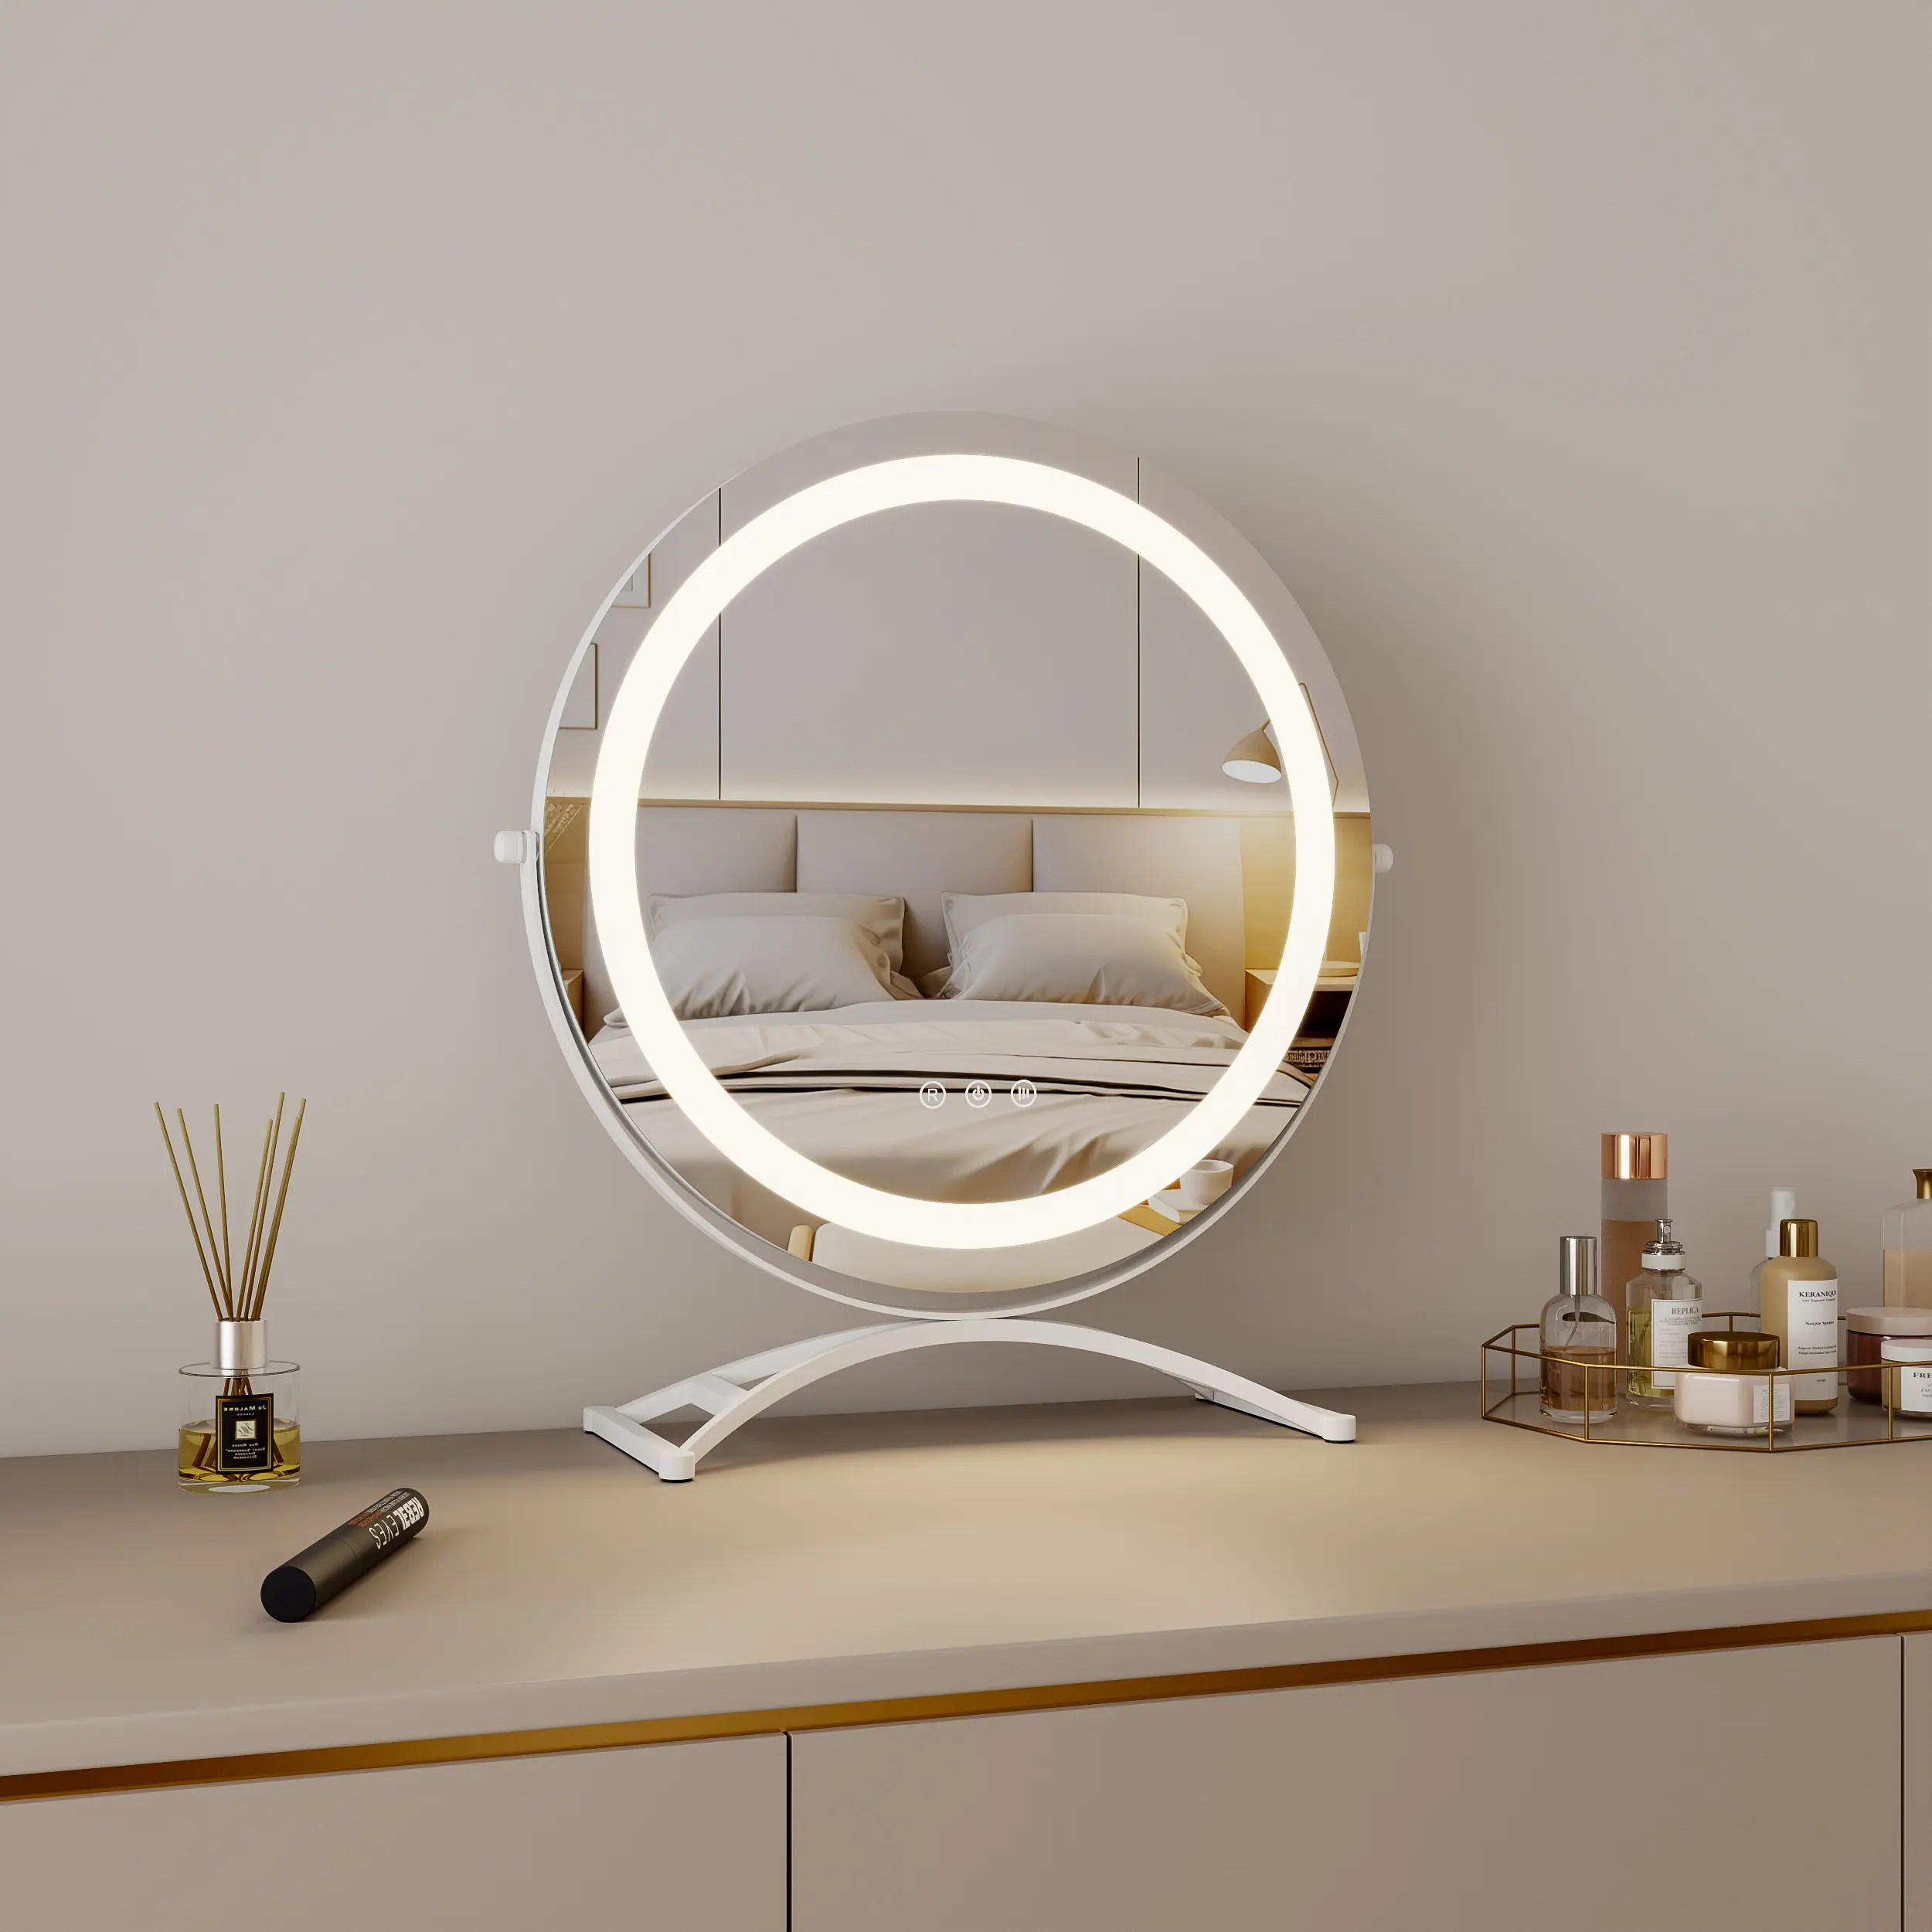 Adaptateur 12v Private Label Personnalisable Round Cosmetic Tabletop Makeup Table Vanity with Lights LED Beauty Mirror